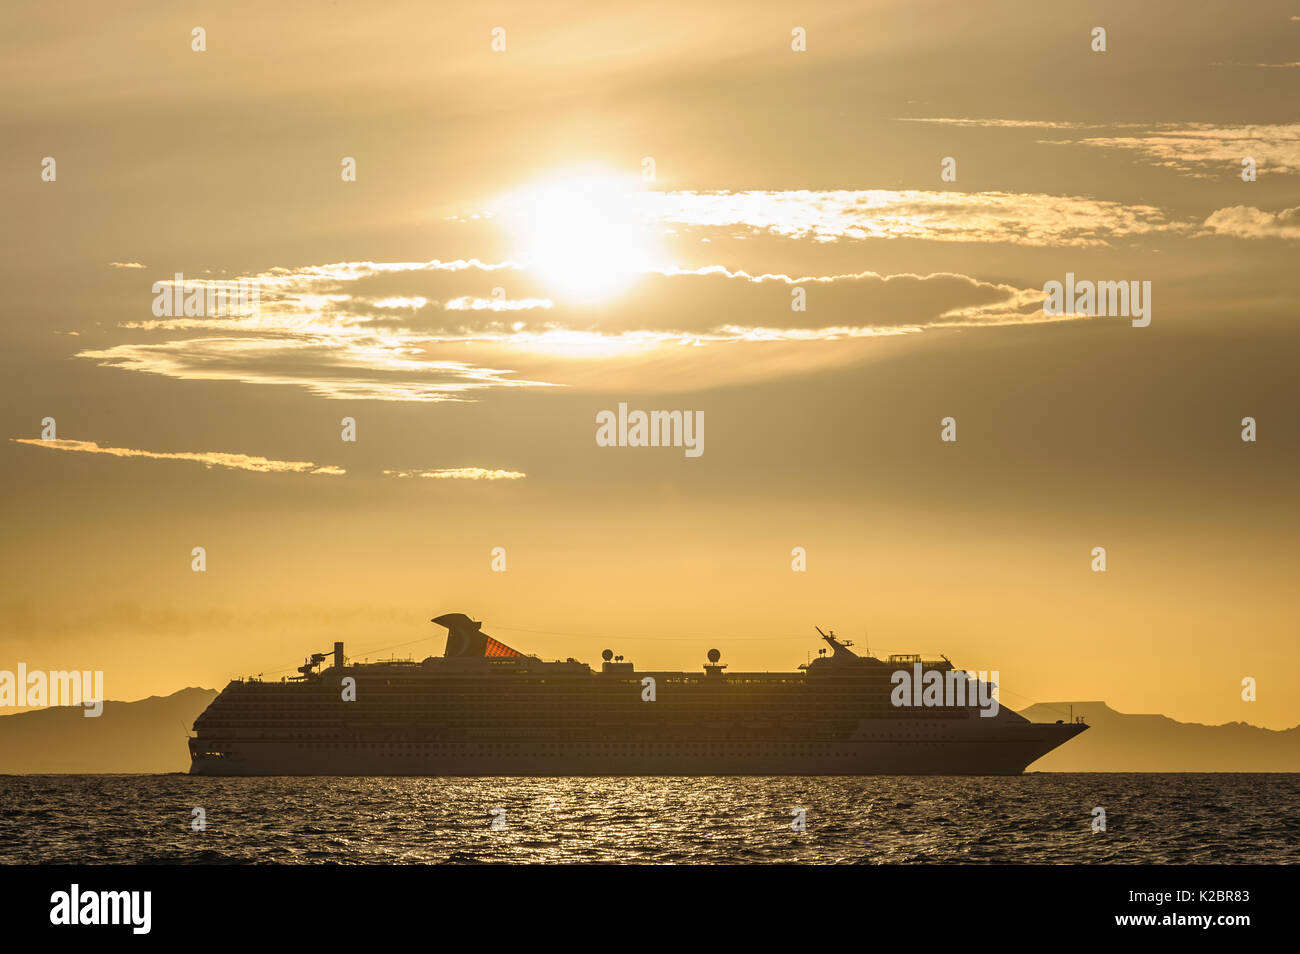 Cruise Liner 'Carnival Spirit' at sunset, Gulf of California, Mexico. All non-editorial uses must be cleared individually. Stock Photo